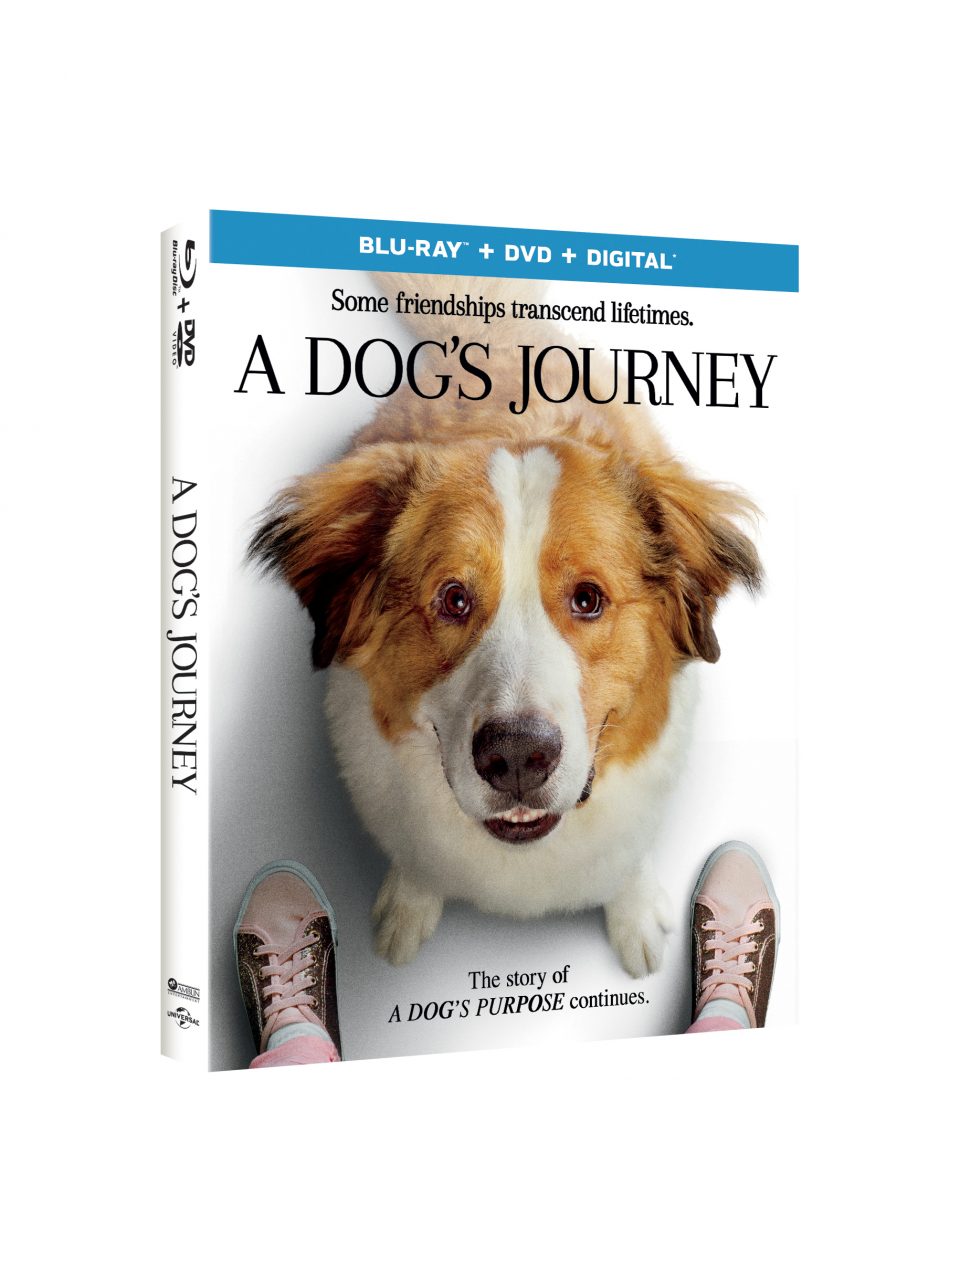 A Dog's Journey Blu-Ray Combo Pack cover (Universal Pictures Home Entertainment)